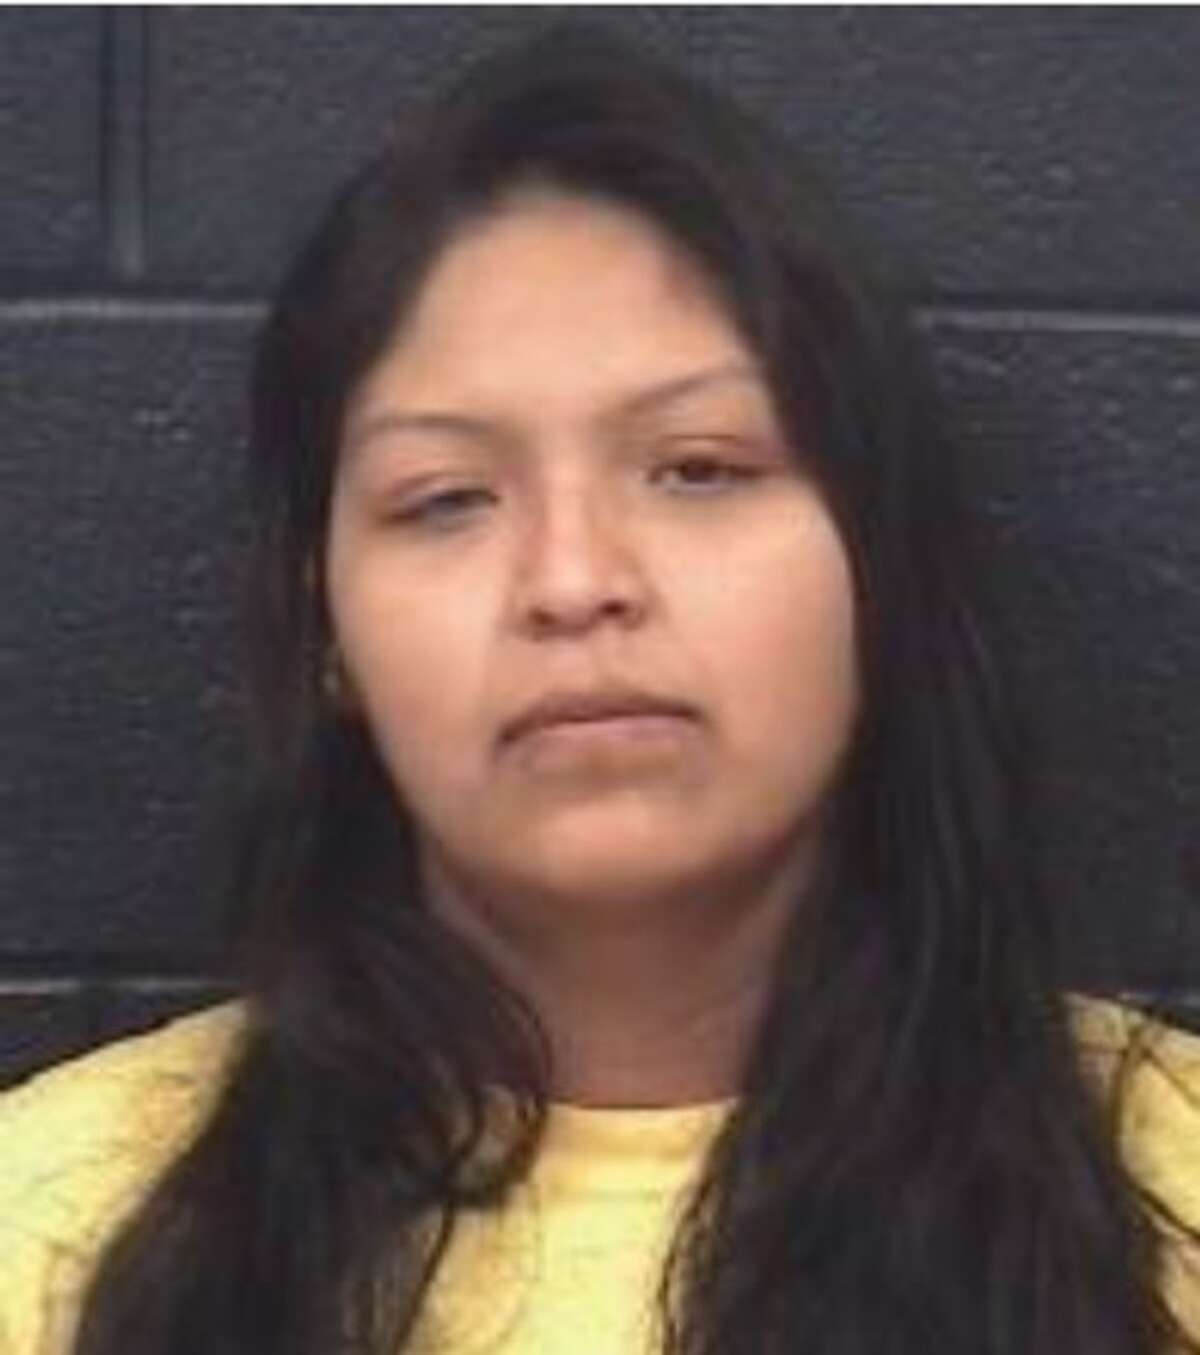 Yahaira Muñoz, 22, was charged with manufacturing, delivery of a controlled substance.